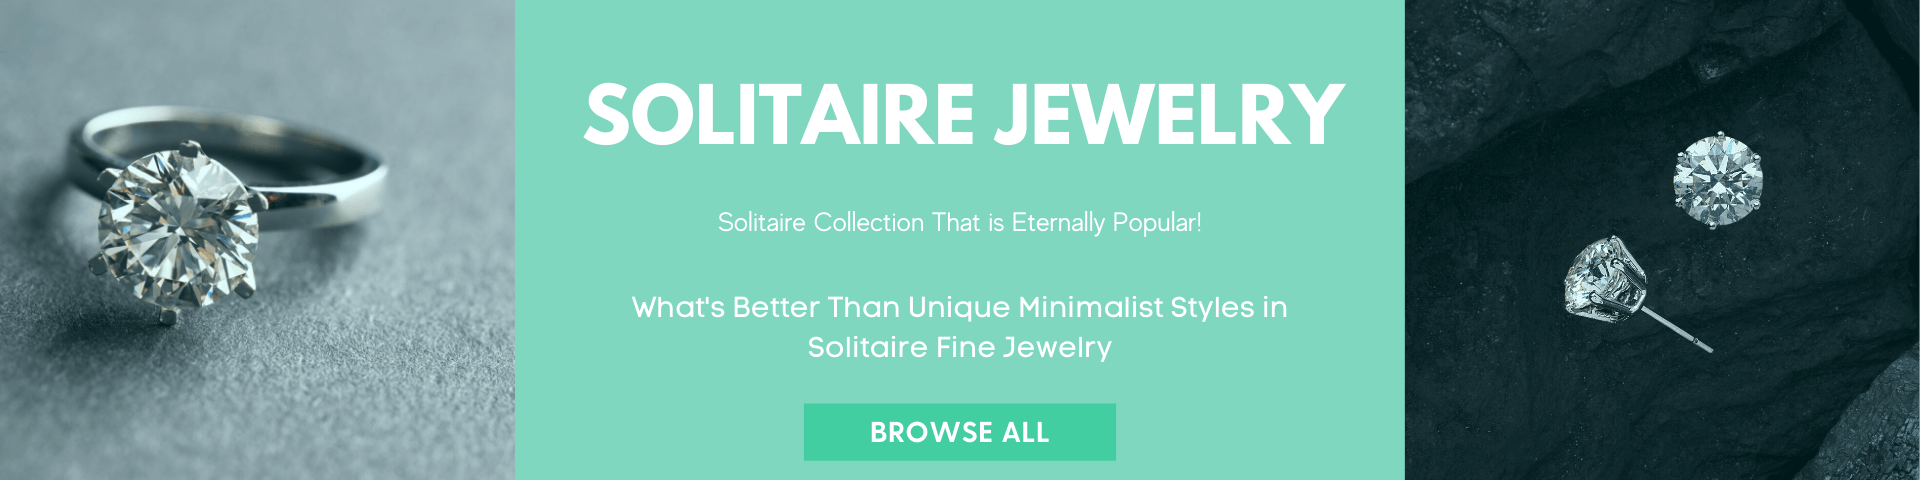 Solitaire Jewelry